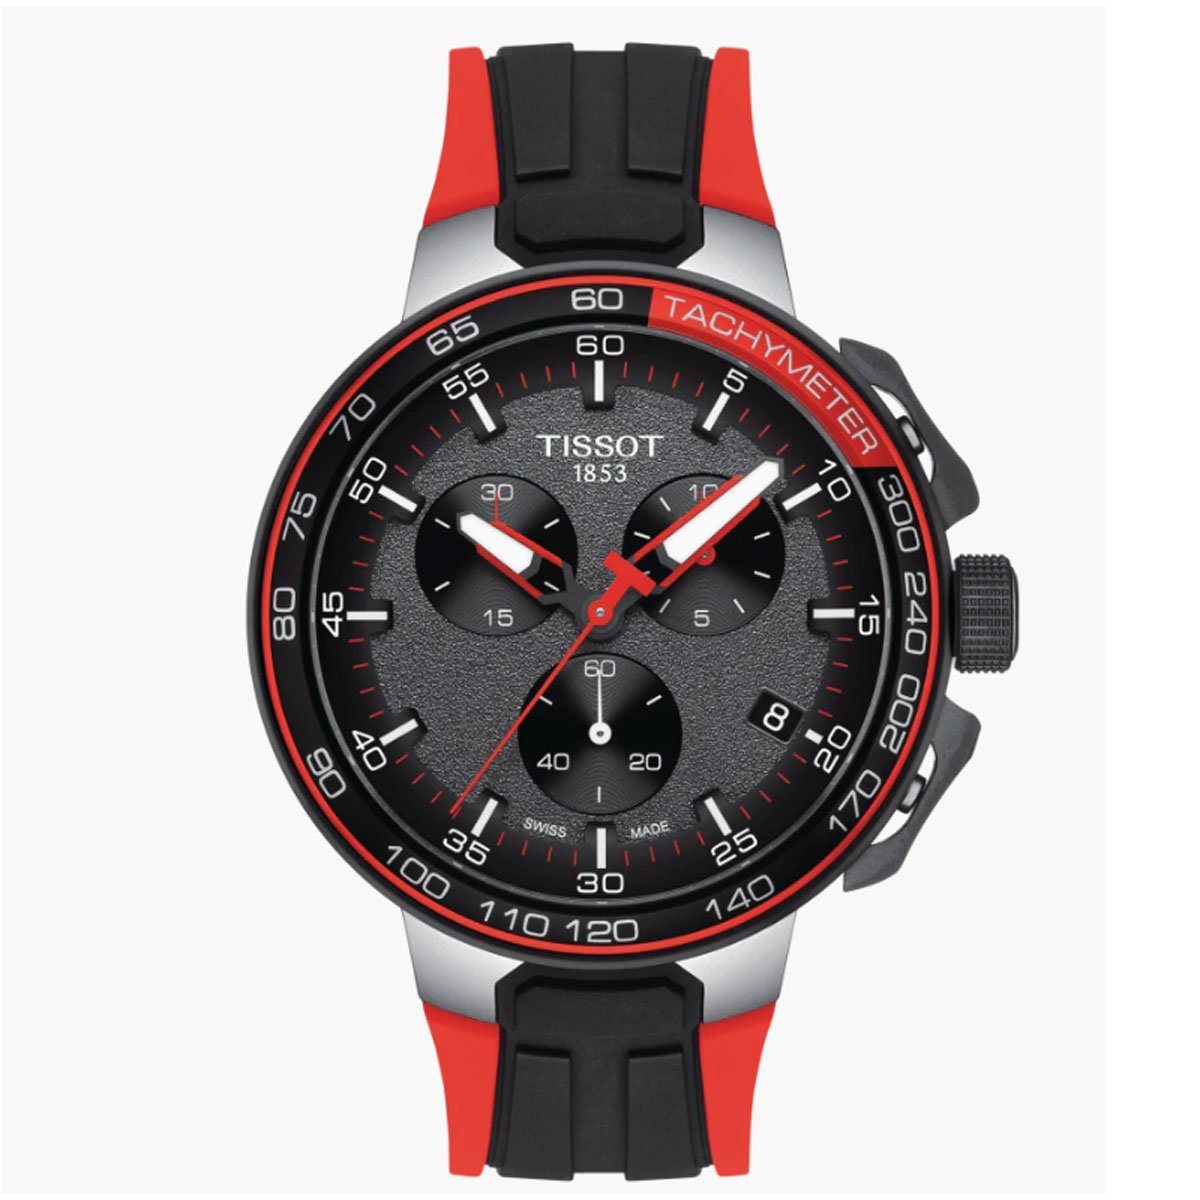 TISSOT T-RACE CYCLING BLACK/RED SILICONE WATCH STRAP image